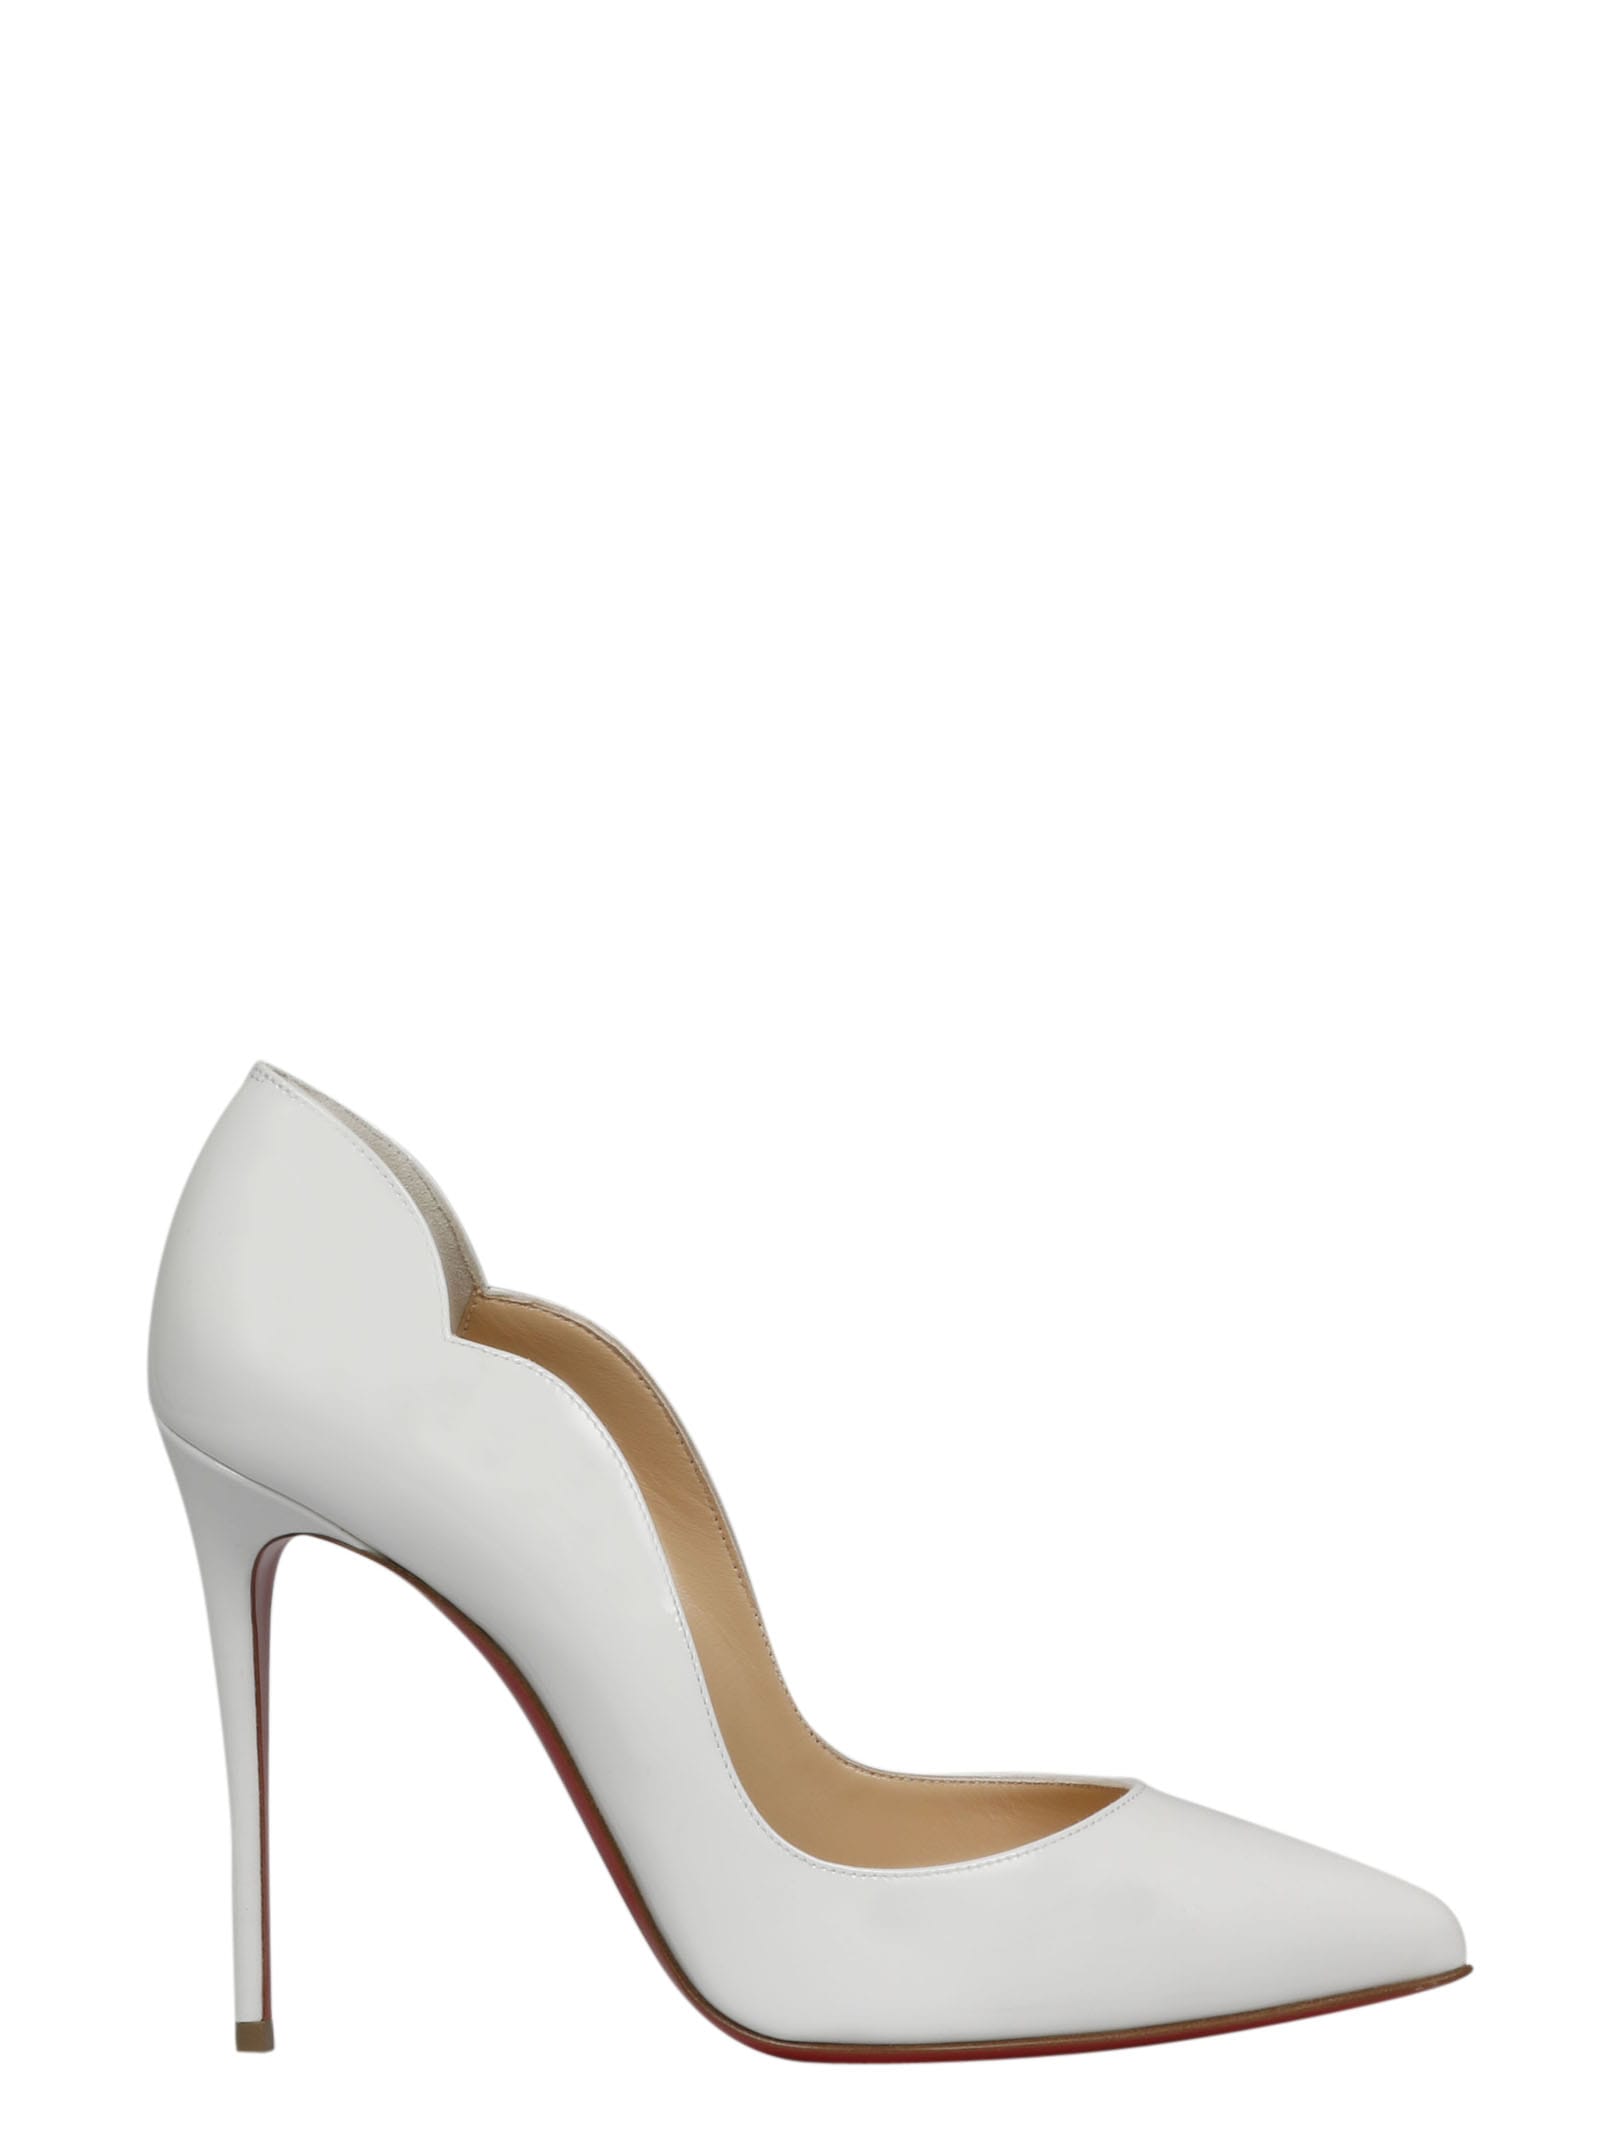 Buy Christian Louboutin Hot Chick Pumps online, shop Christian Louboutin shoes with free shipping